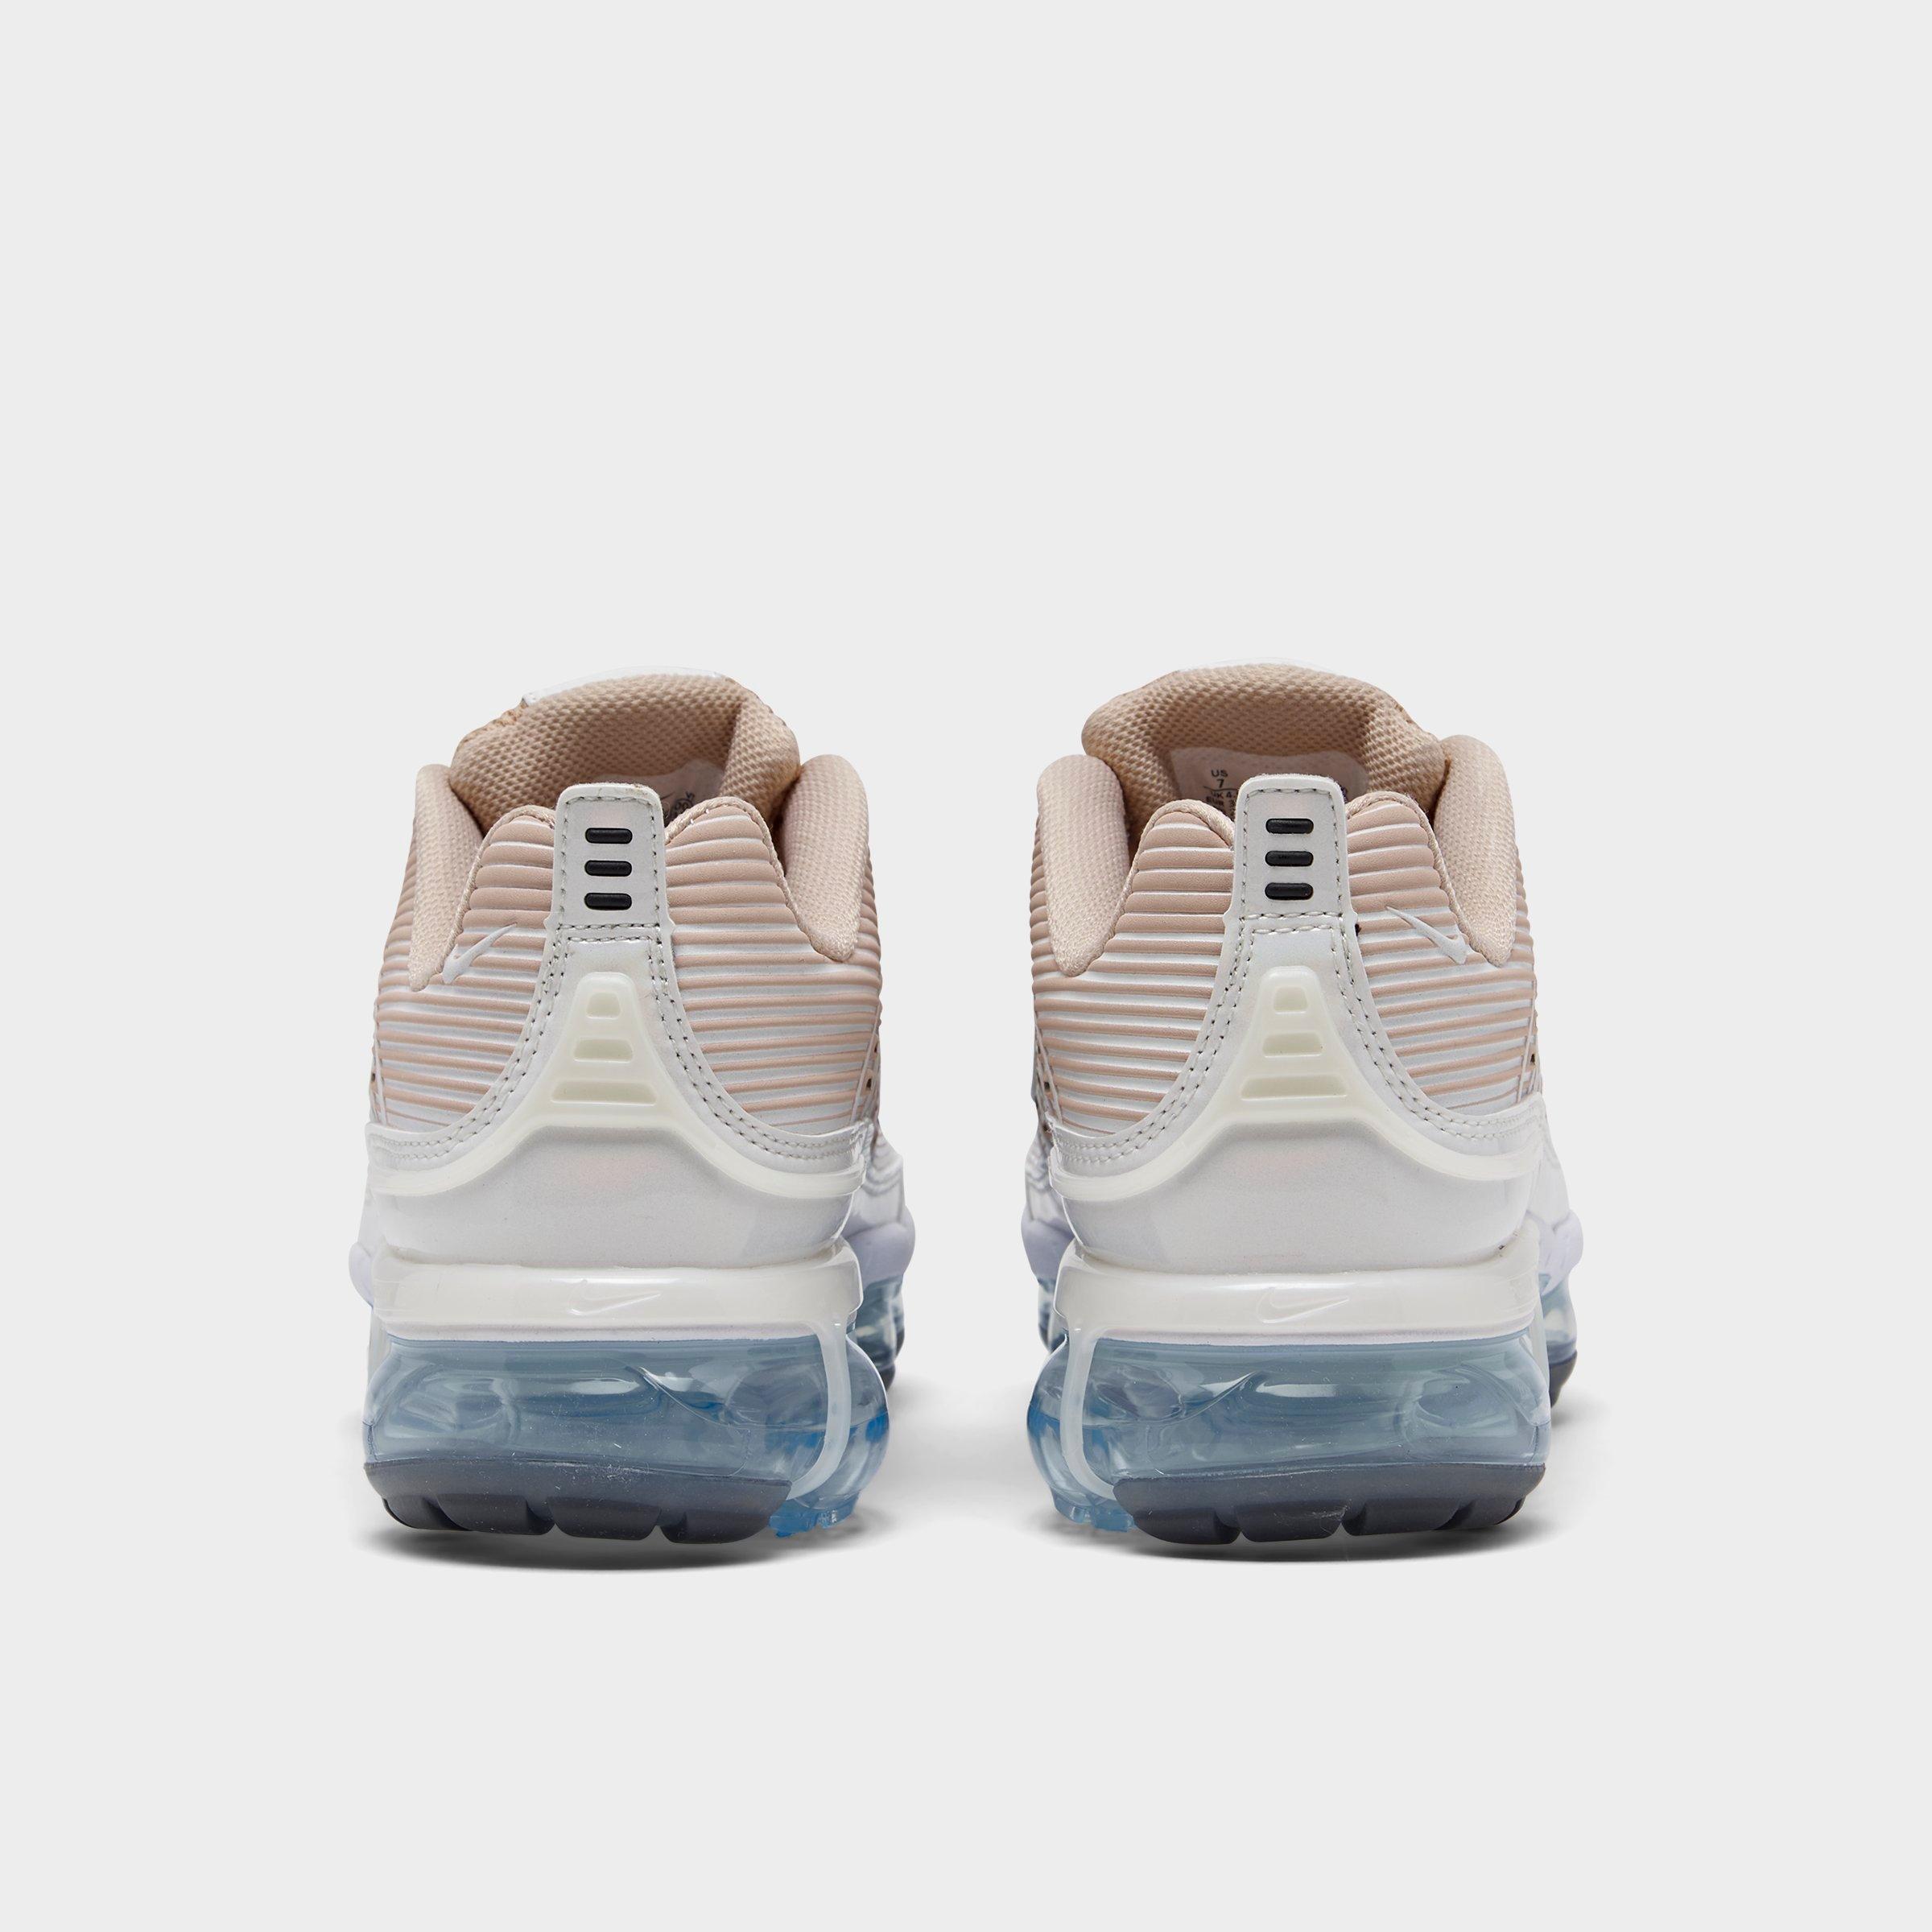 vapormax on sale for women